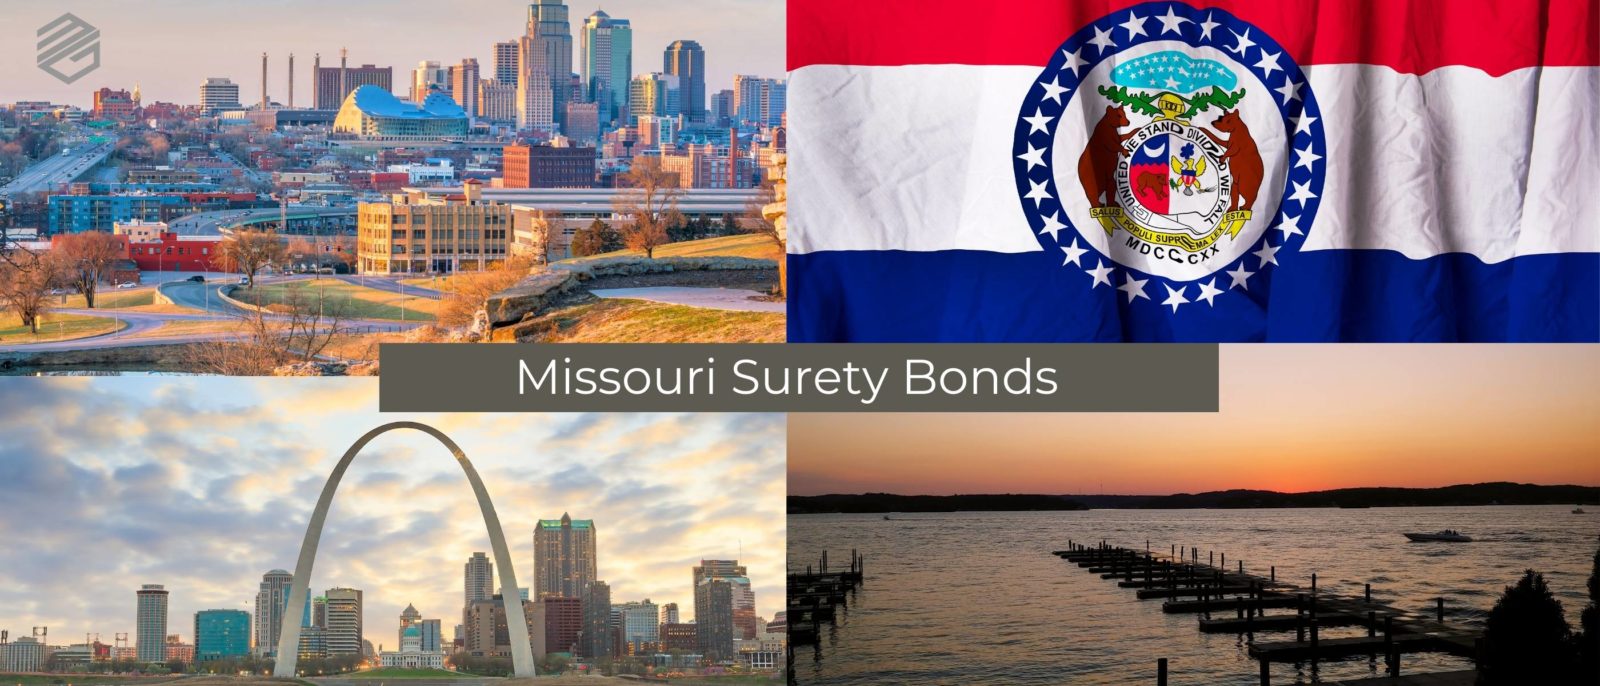 Missouri Surety Bonds - 4 Pictures including the Missouri state flag, St. Louis, Kansas City and the fountains on the Lake of the Ozarks. The words, " Missouri Surety Bonds" in a text box.